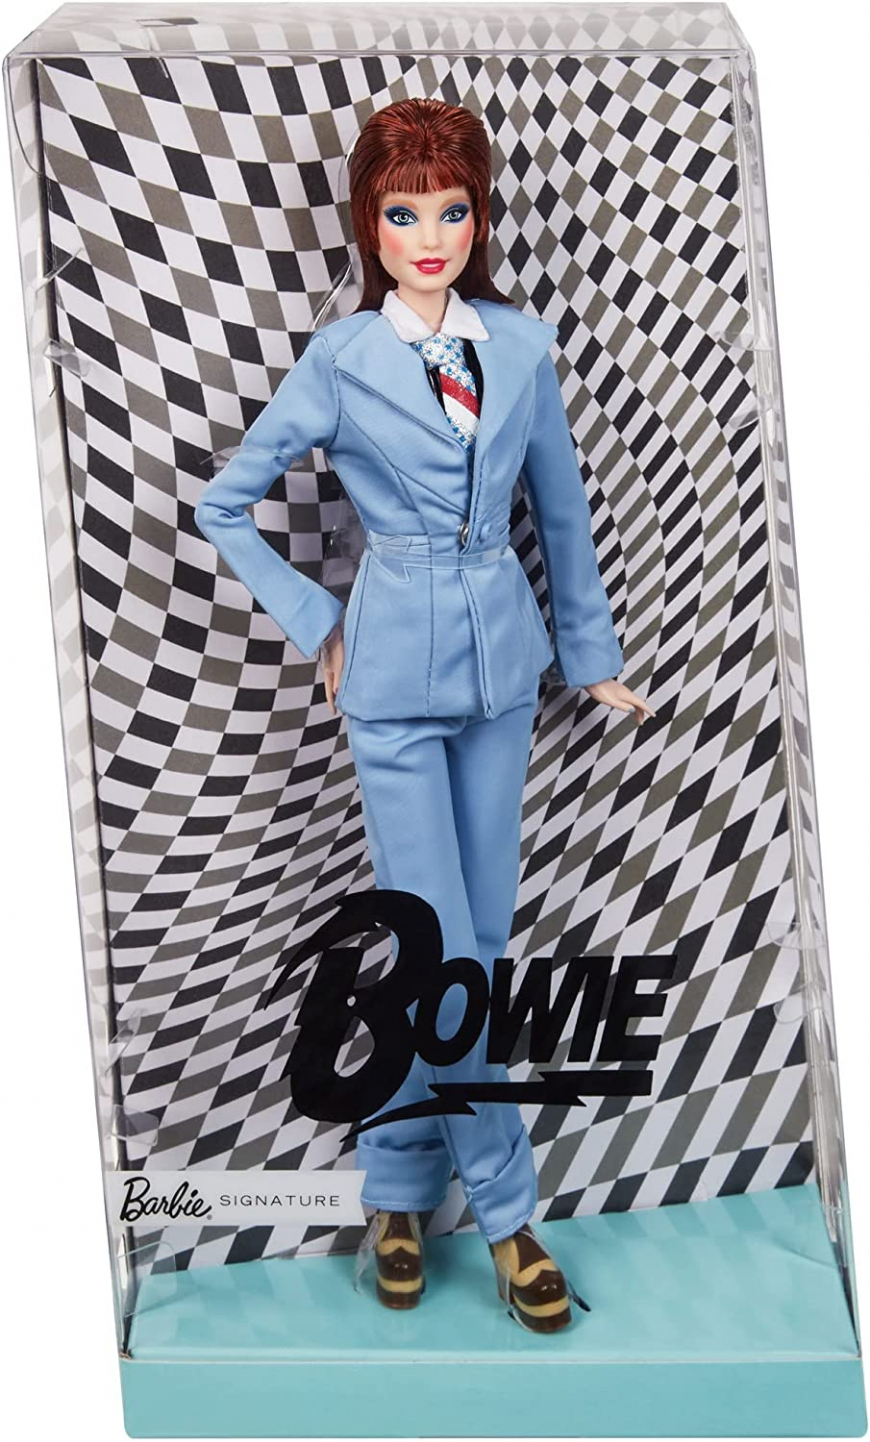 Barbie David Bowie collector doll 2022 in light blue costume from Life on Mars